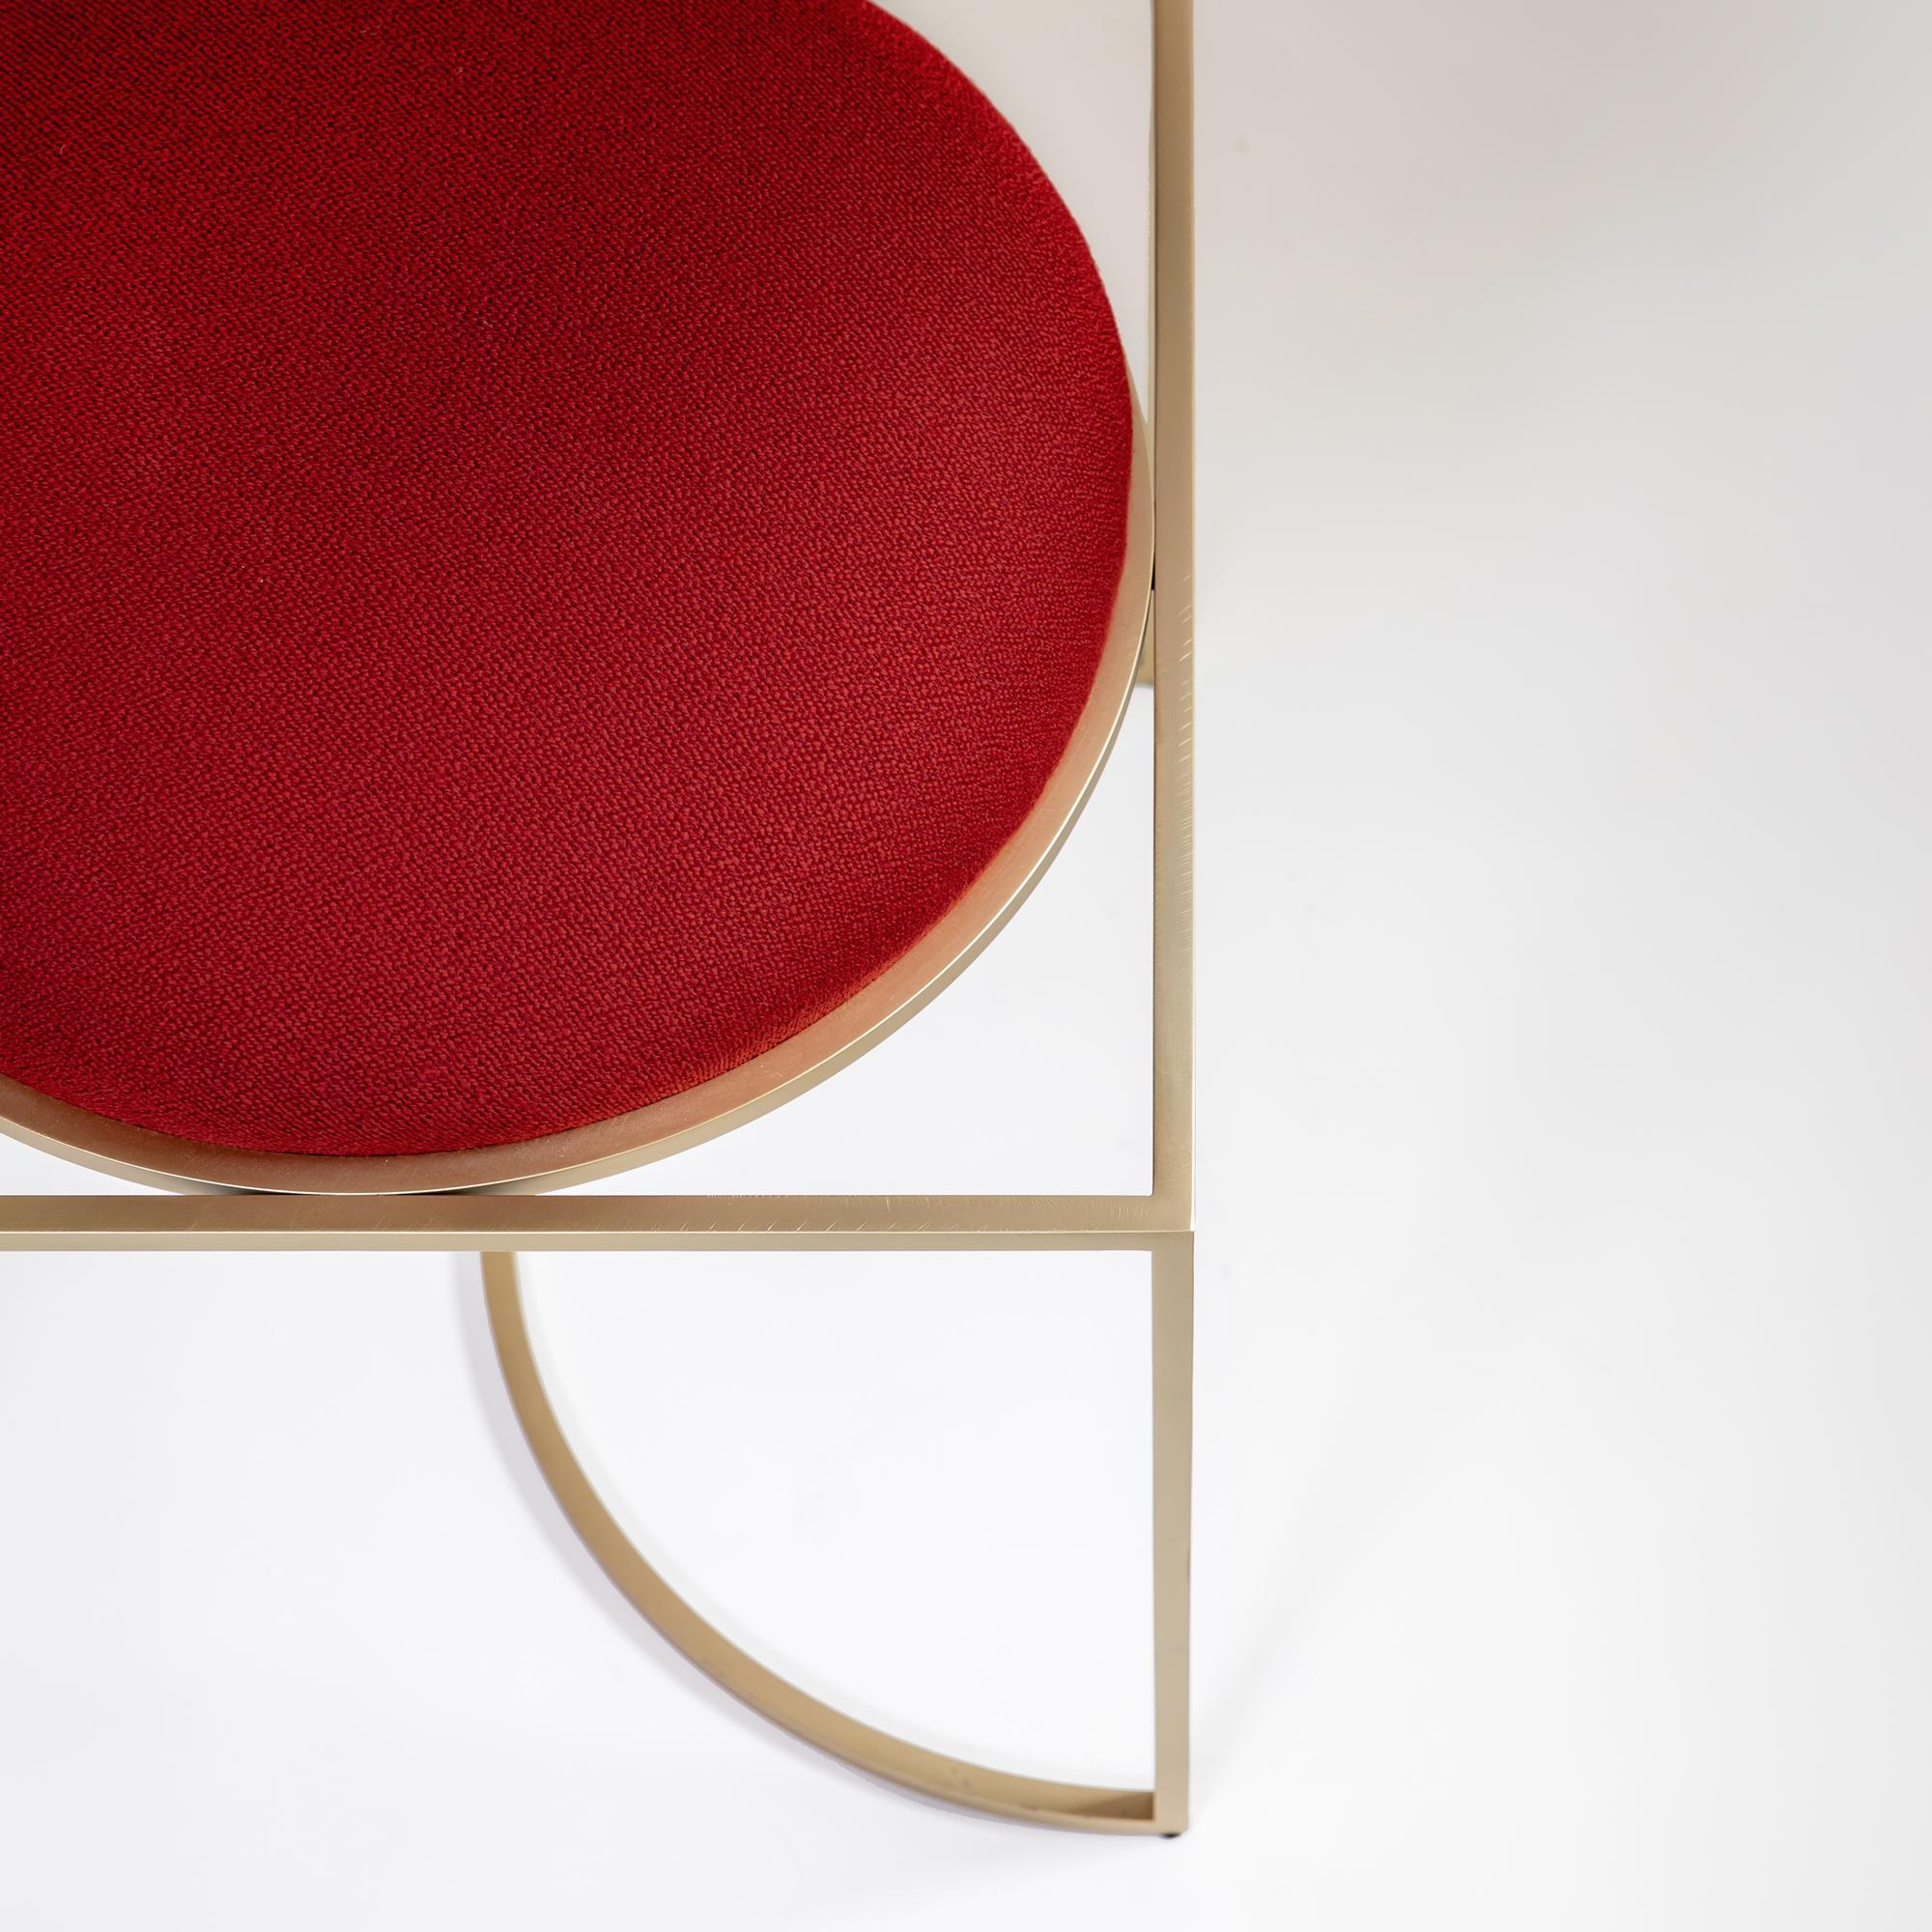 British Solar Chair in Red Wool Fabric and Brushed Brass Frame by Lara Bohinc